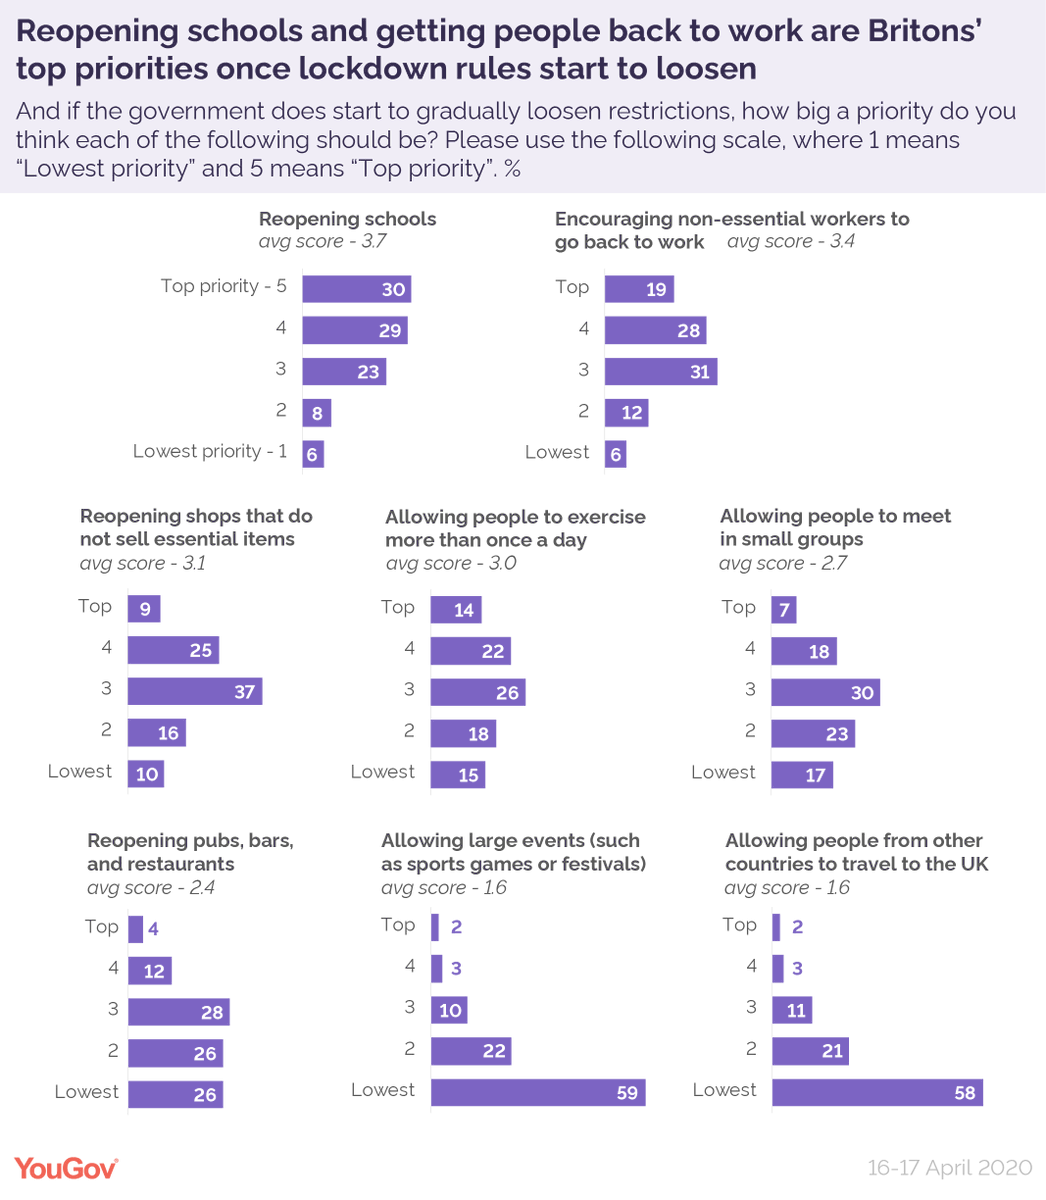 When time does come to start loosening the lockdown, Britons prioritise, in order...1. Reopening schools2. Getting people back to work3. Reopening shops4. More exercise allowance5. Small gatherings6. Reopening pubs/restaurants7. Large gatherings https://yougov.co.uk/topics/politics/articles-reports/2020/04/21/covid-19-lockdown-public-want-gradual-exit-priorit?utm_source=twitter&utm_medium=website_article&utm_campaign=chris_curtis_lockdown_ending